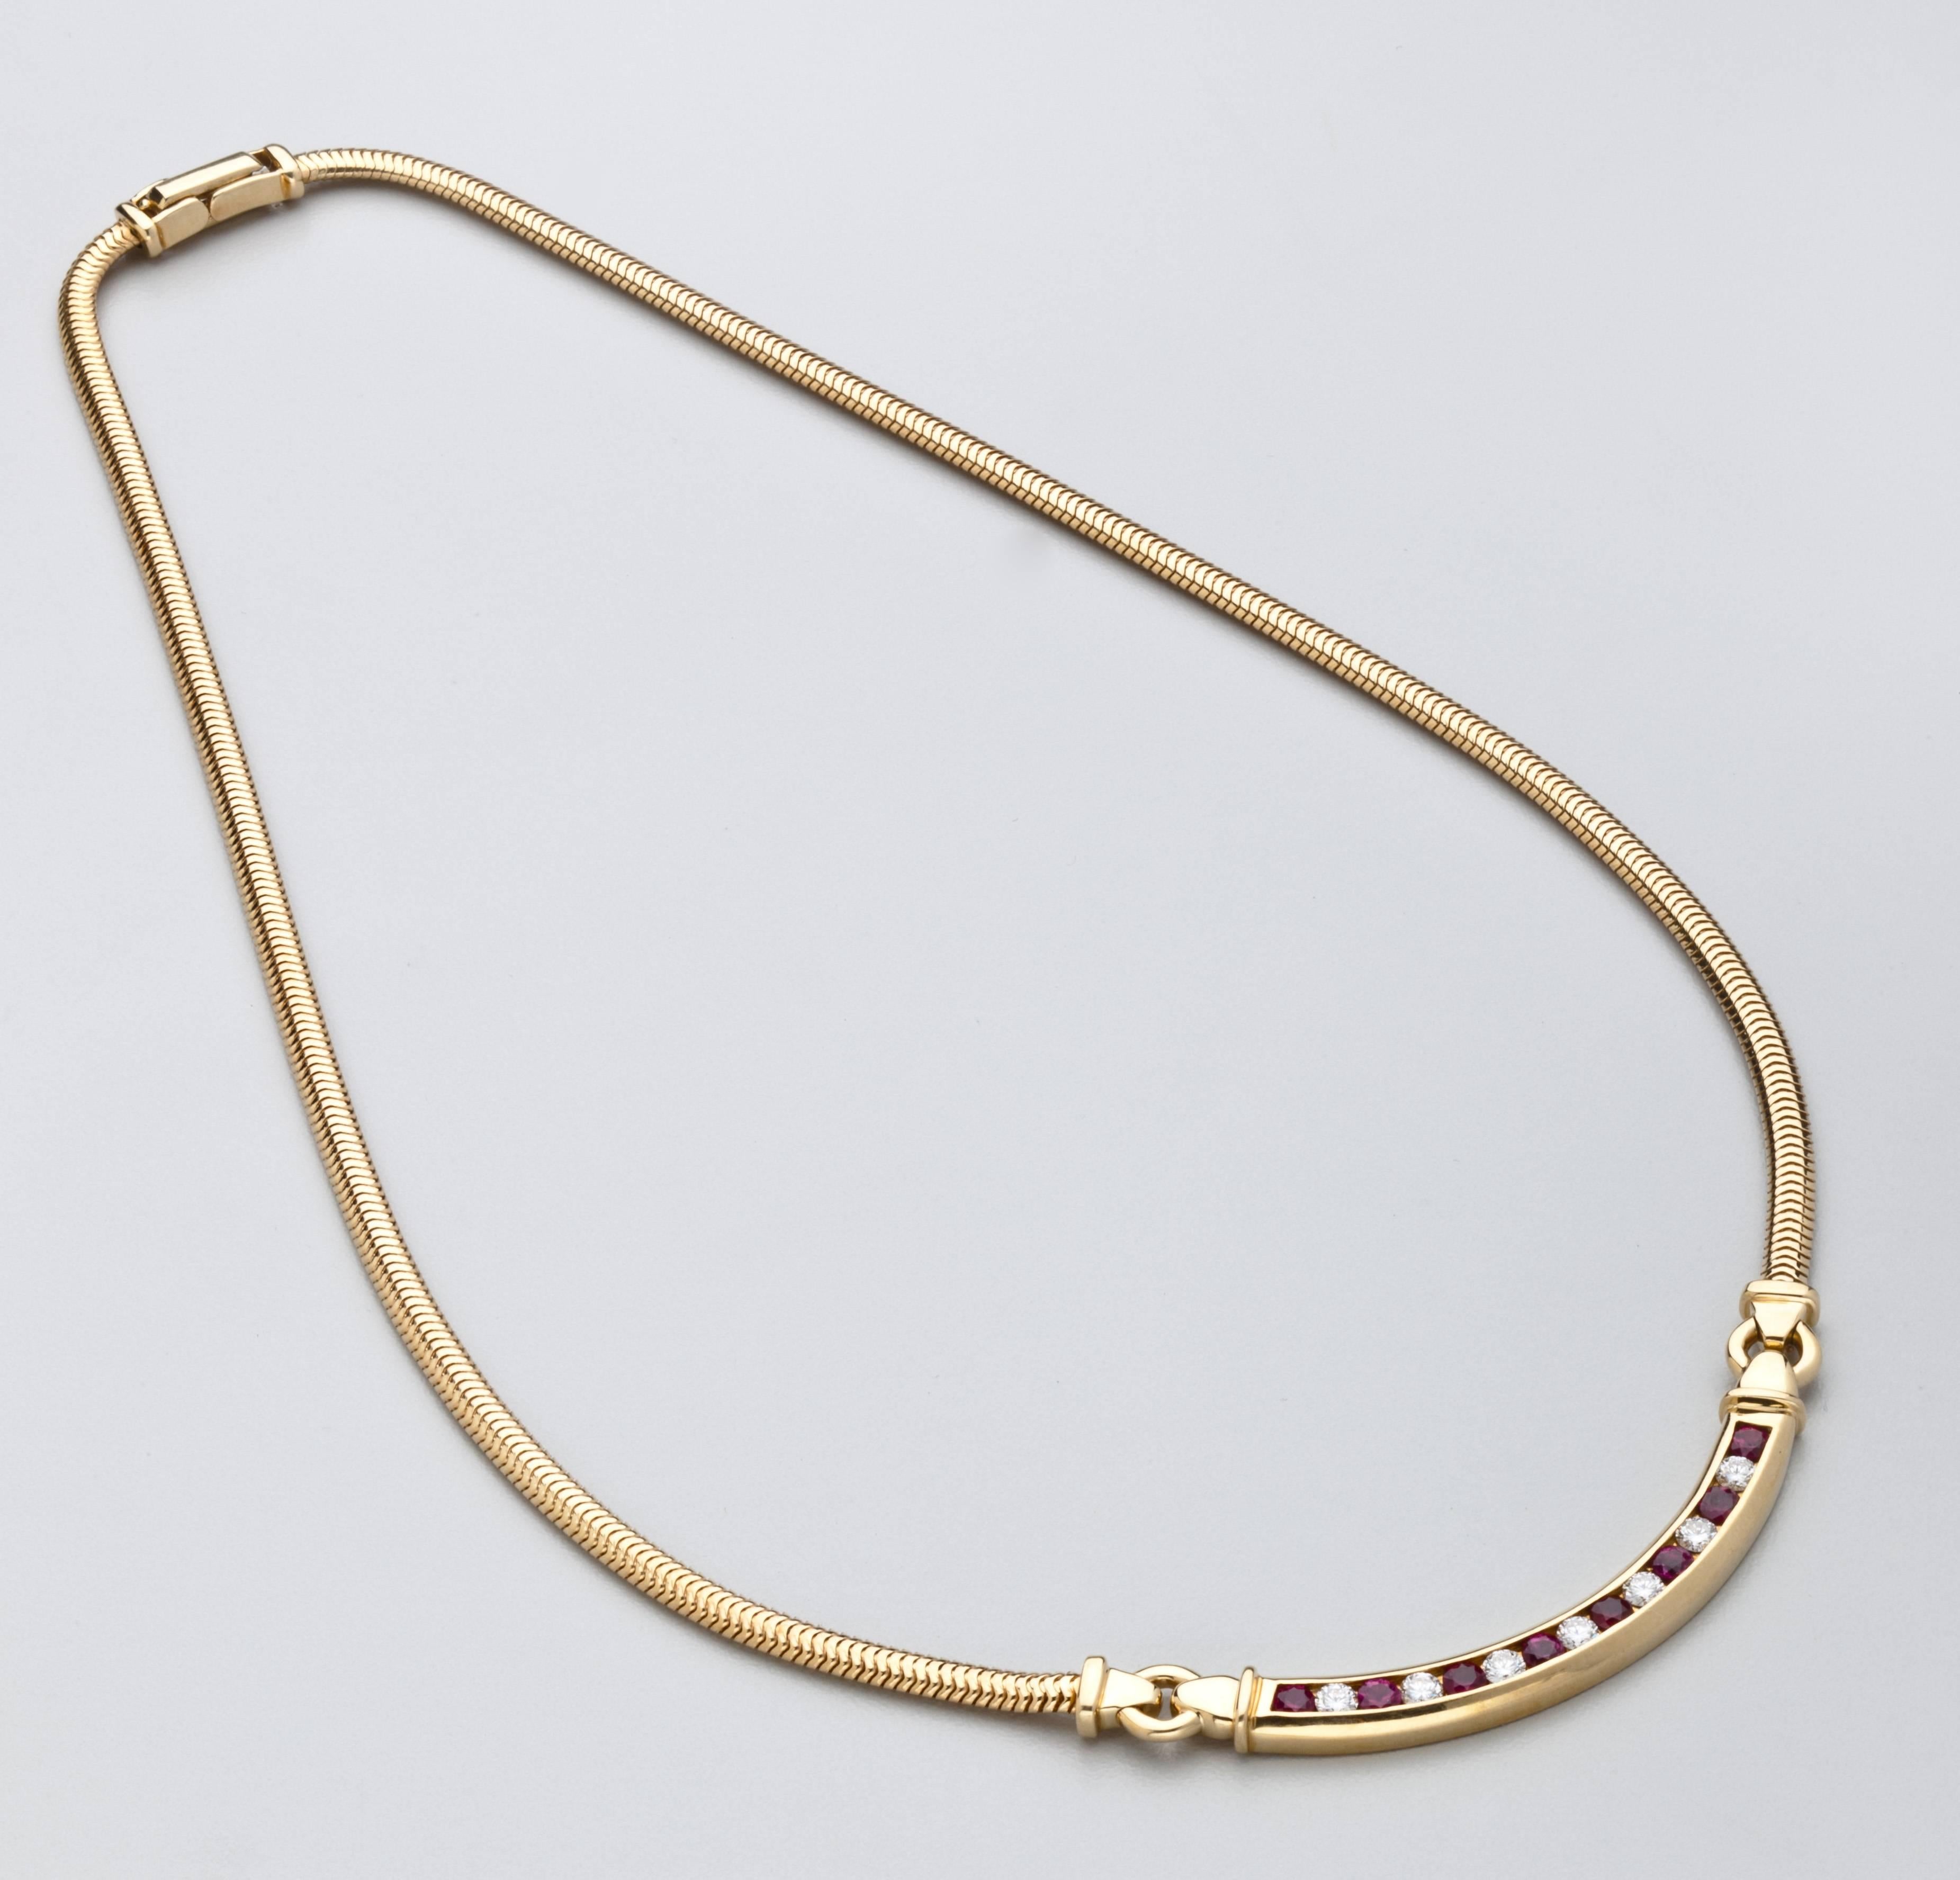 A classic Tiffany necklace in 18 karat gold with eight deep red rubies and  seven full cut diamonds on a strap chain.  Approximately .90 carats diamonds.  Signed Tiffany & Co. 750 .  